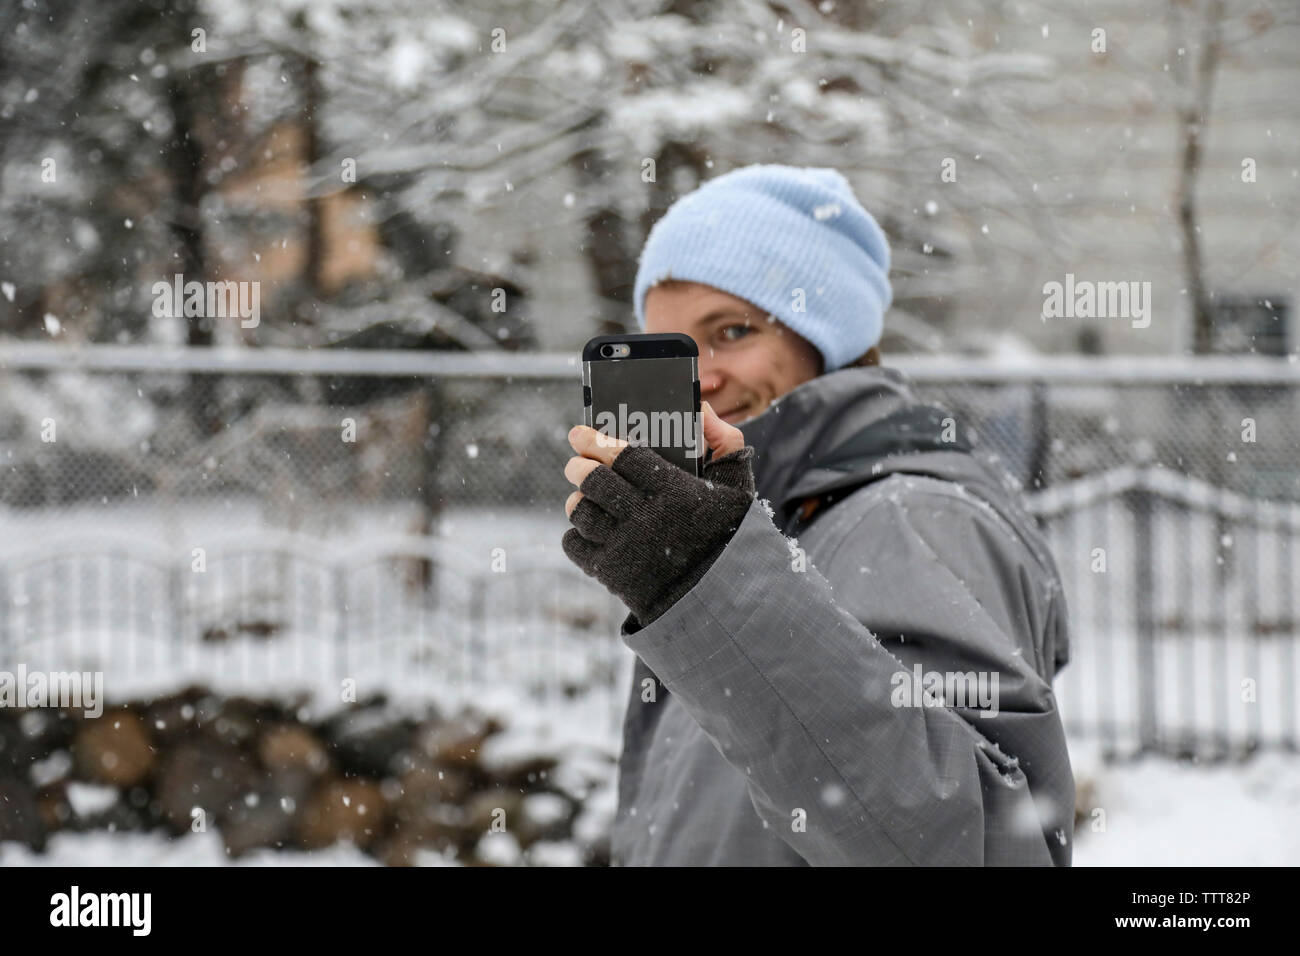 Man wearing warm clothing while taking selfie with smart phone during snowfall Stock Photo